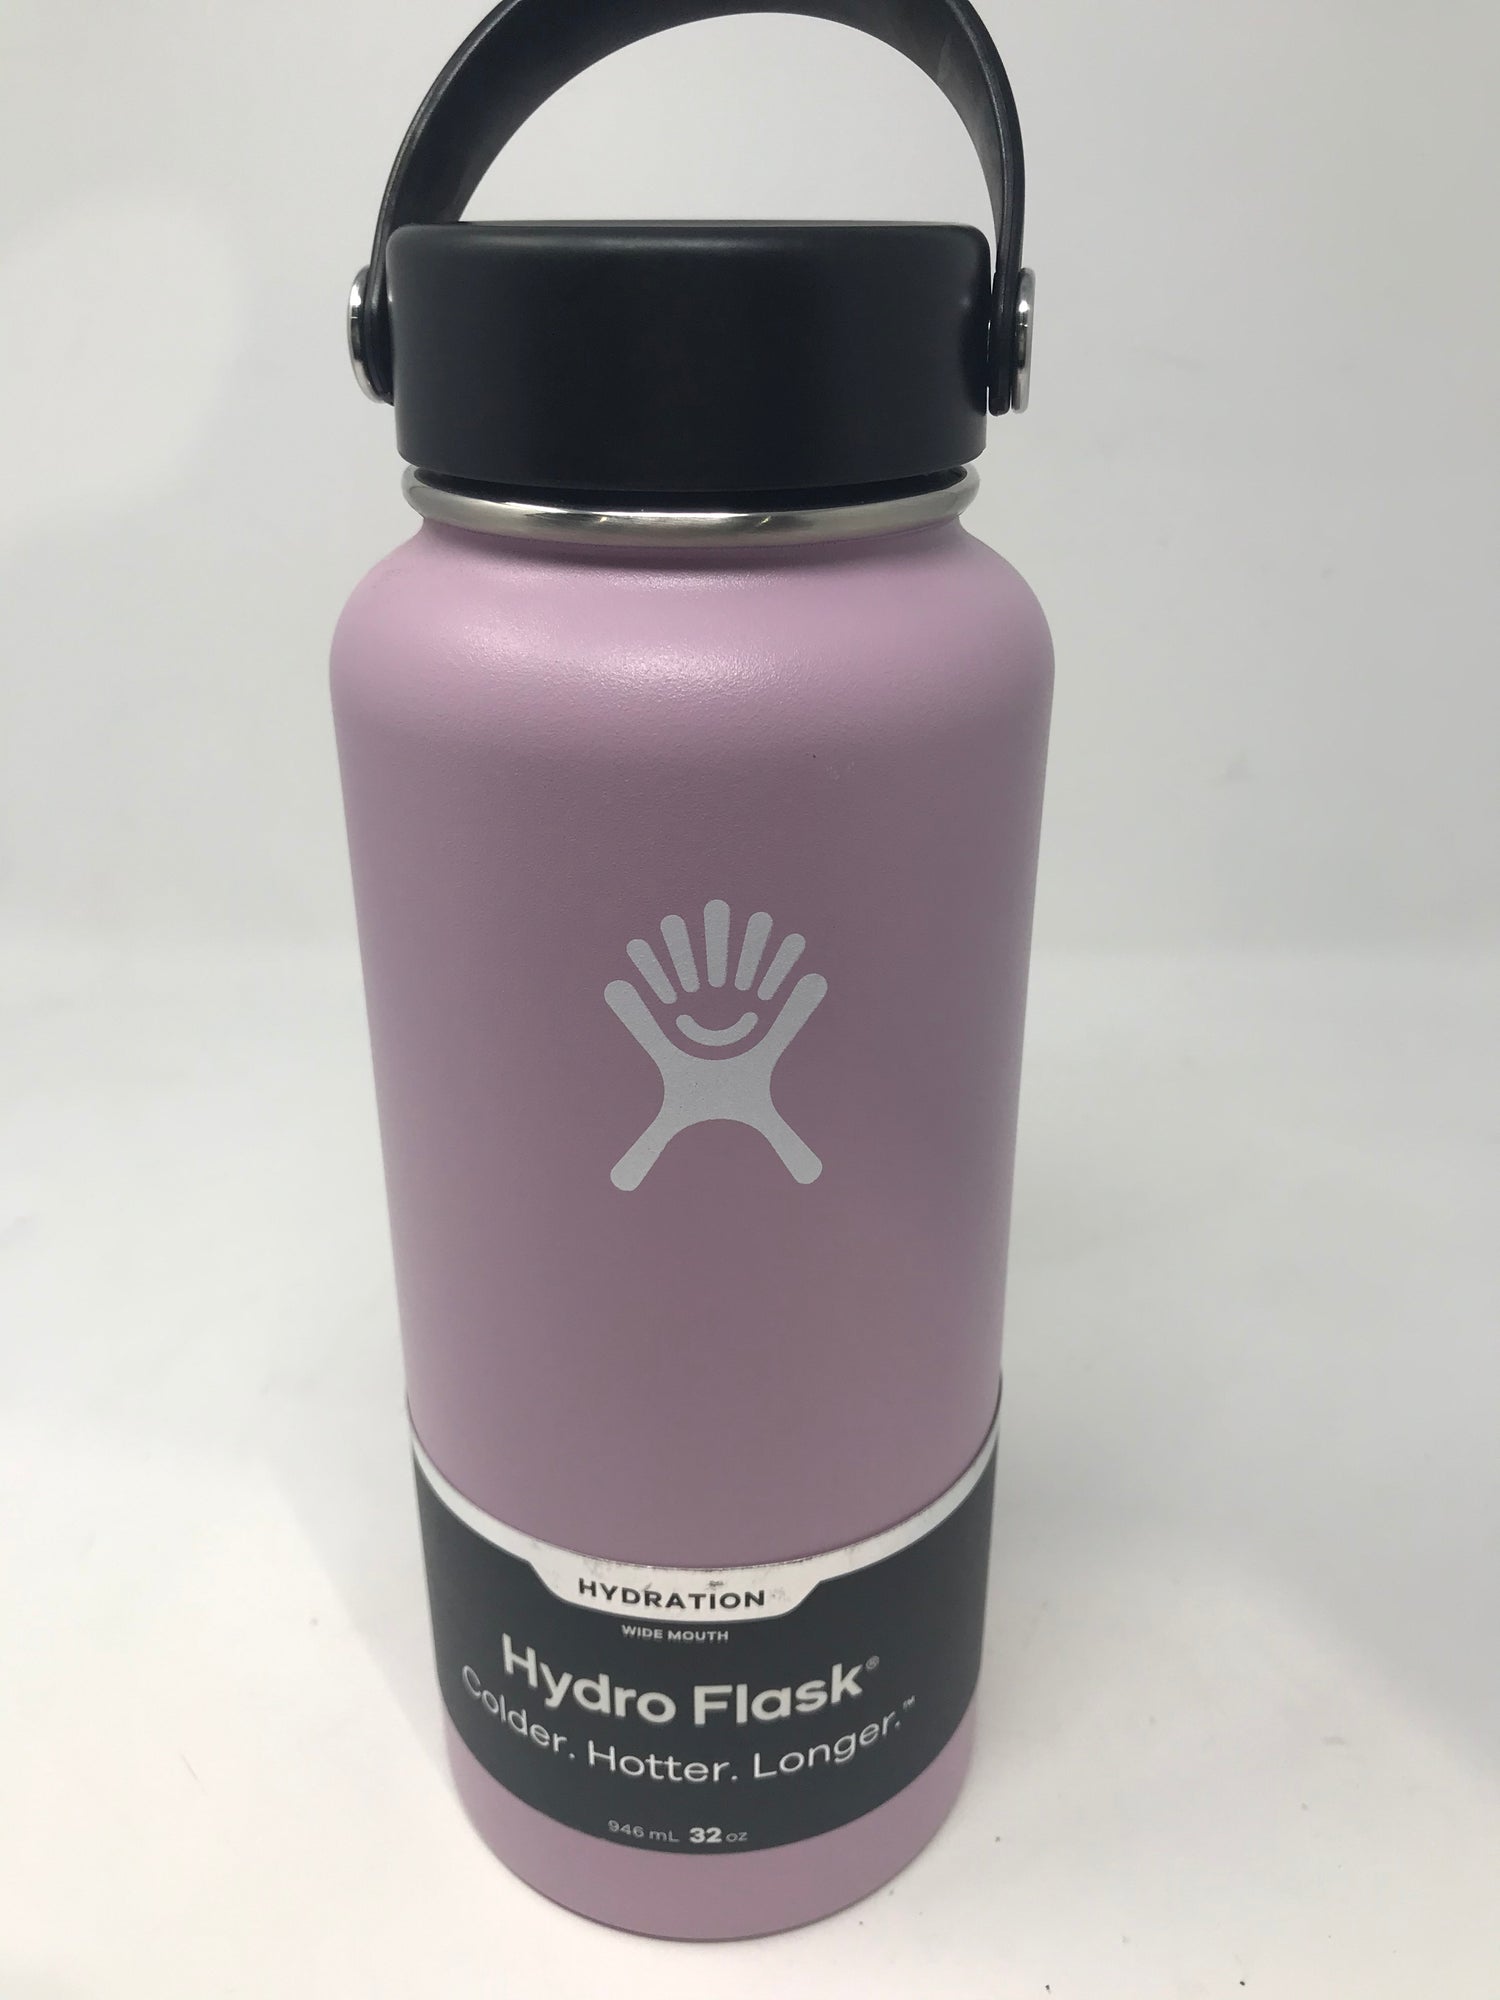 Hydro Flask Fog 32oz Wide Mouth Stainless Steel Water Bottle Light Purple  Lilac